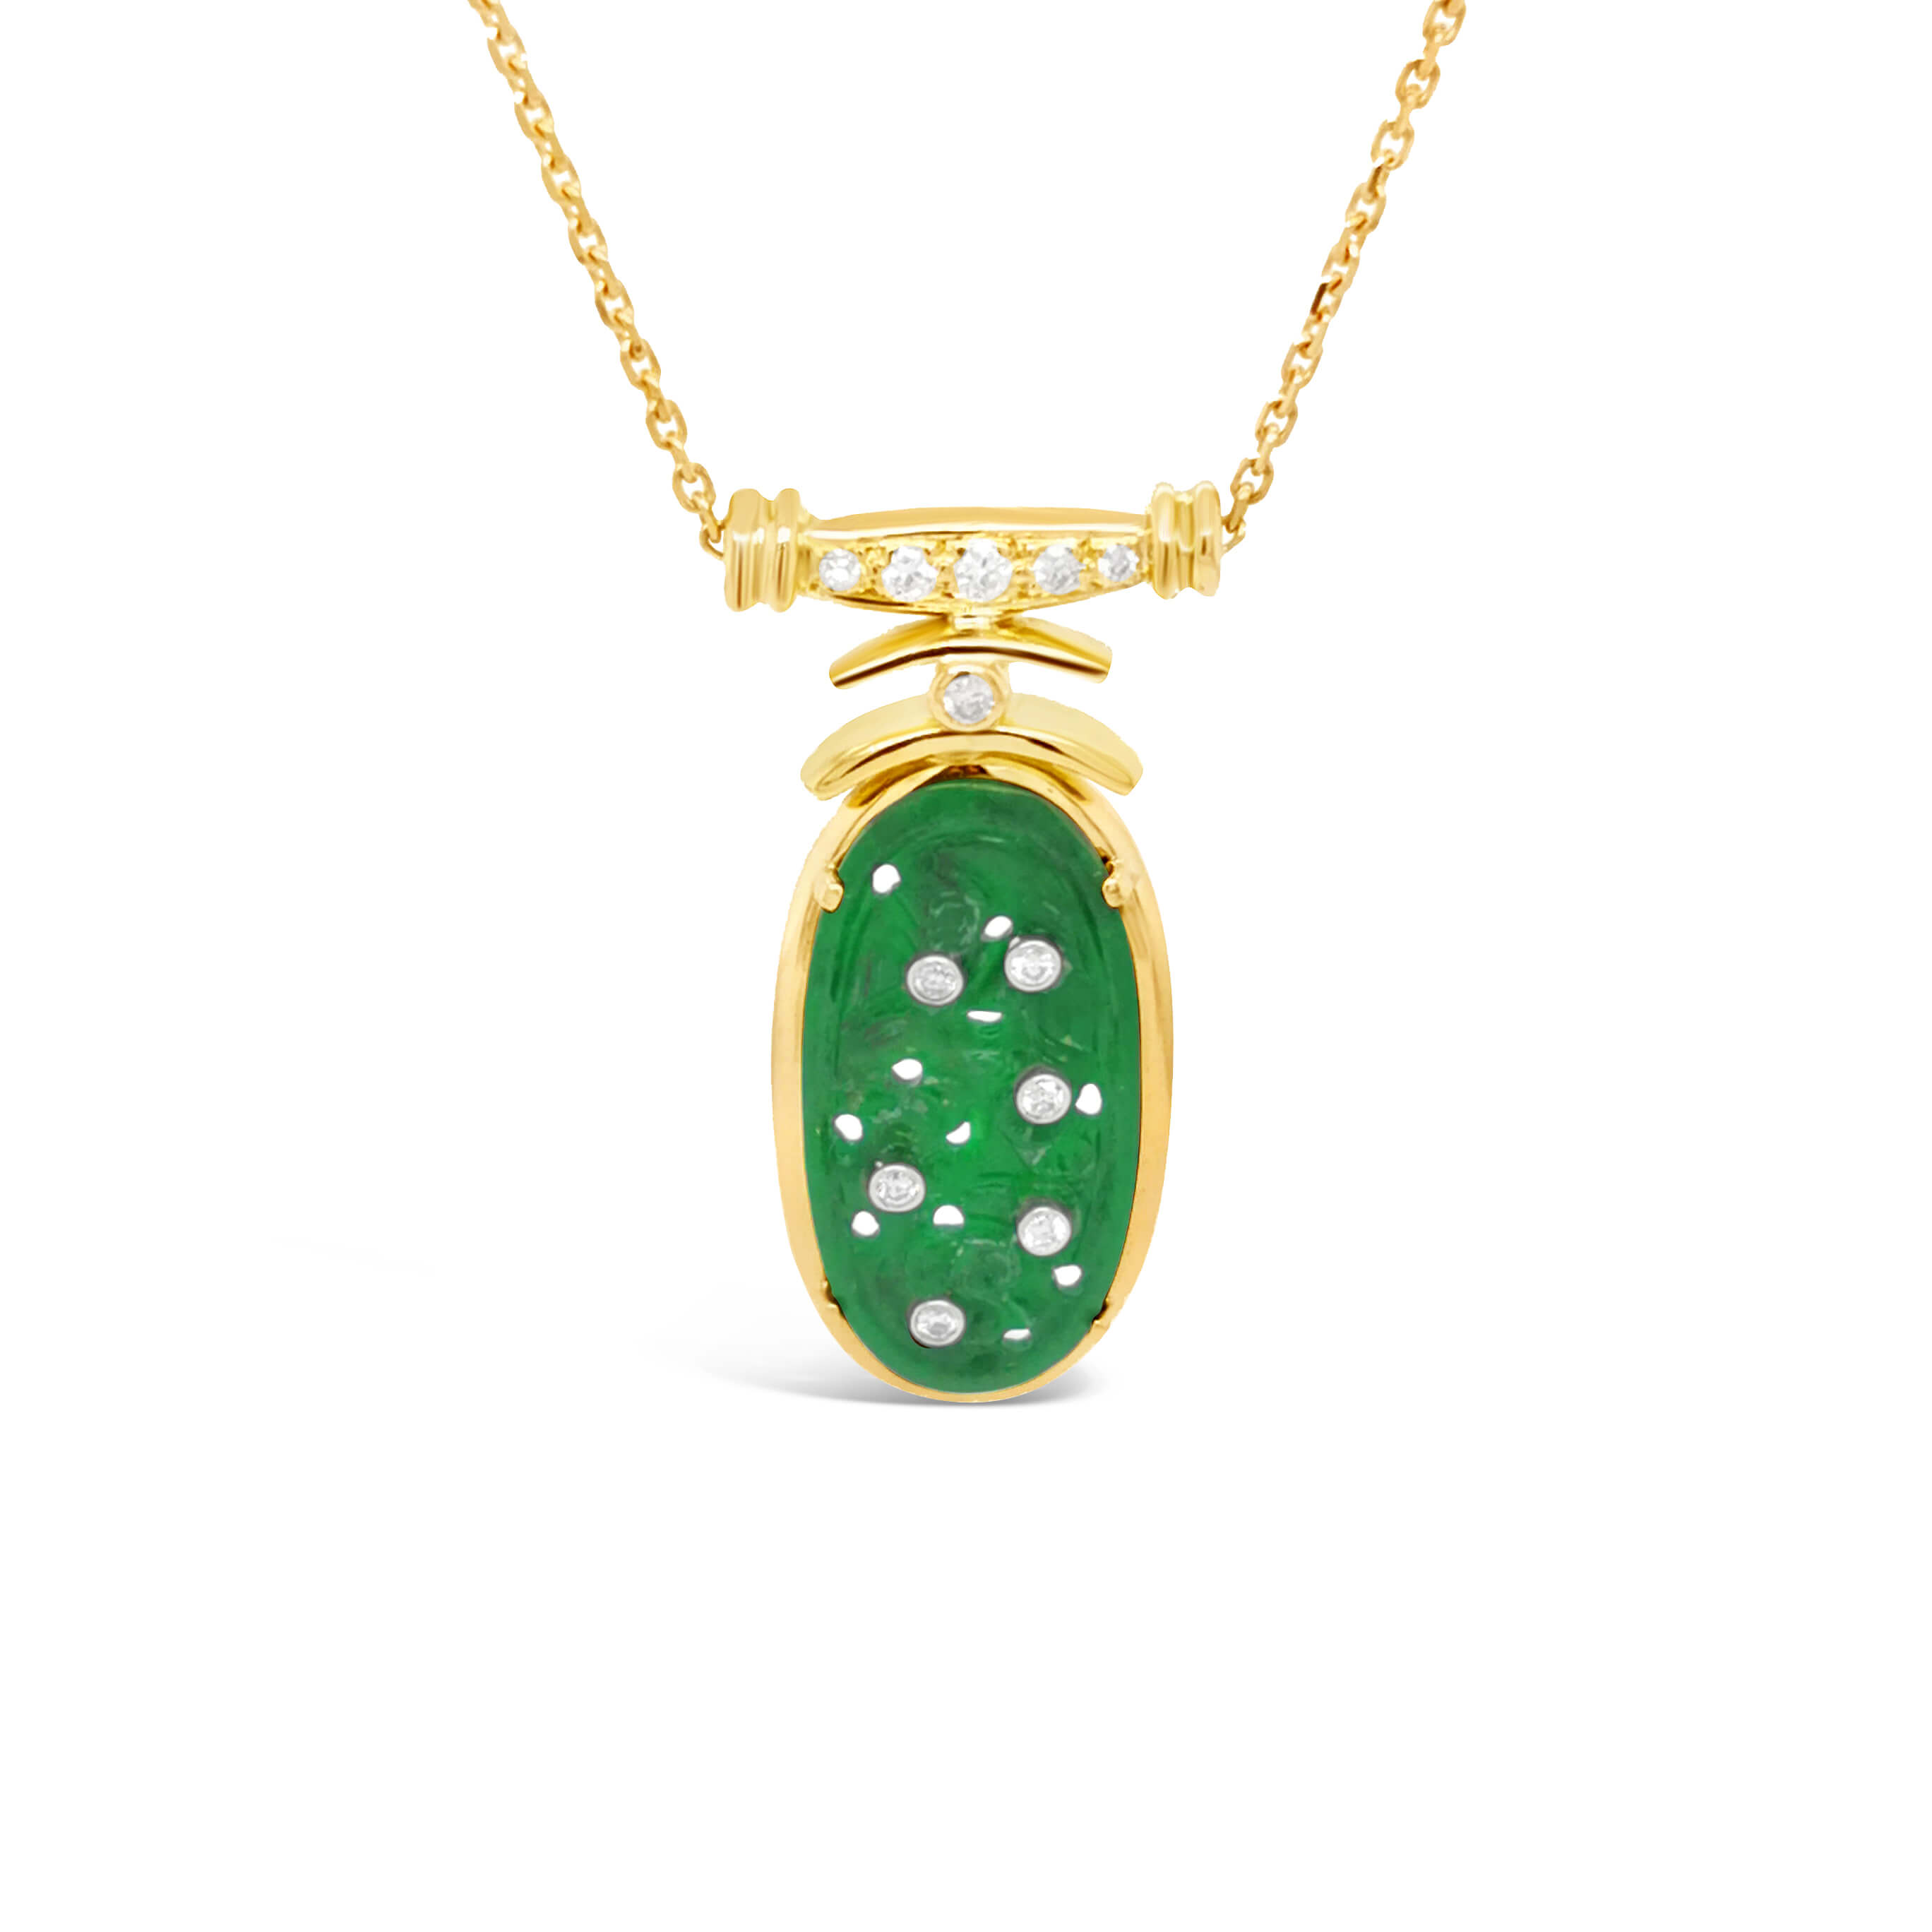 Collection 18-karat white gold, jade and diamond necklace